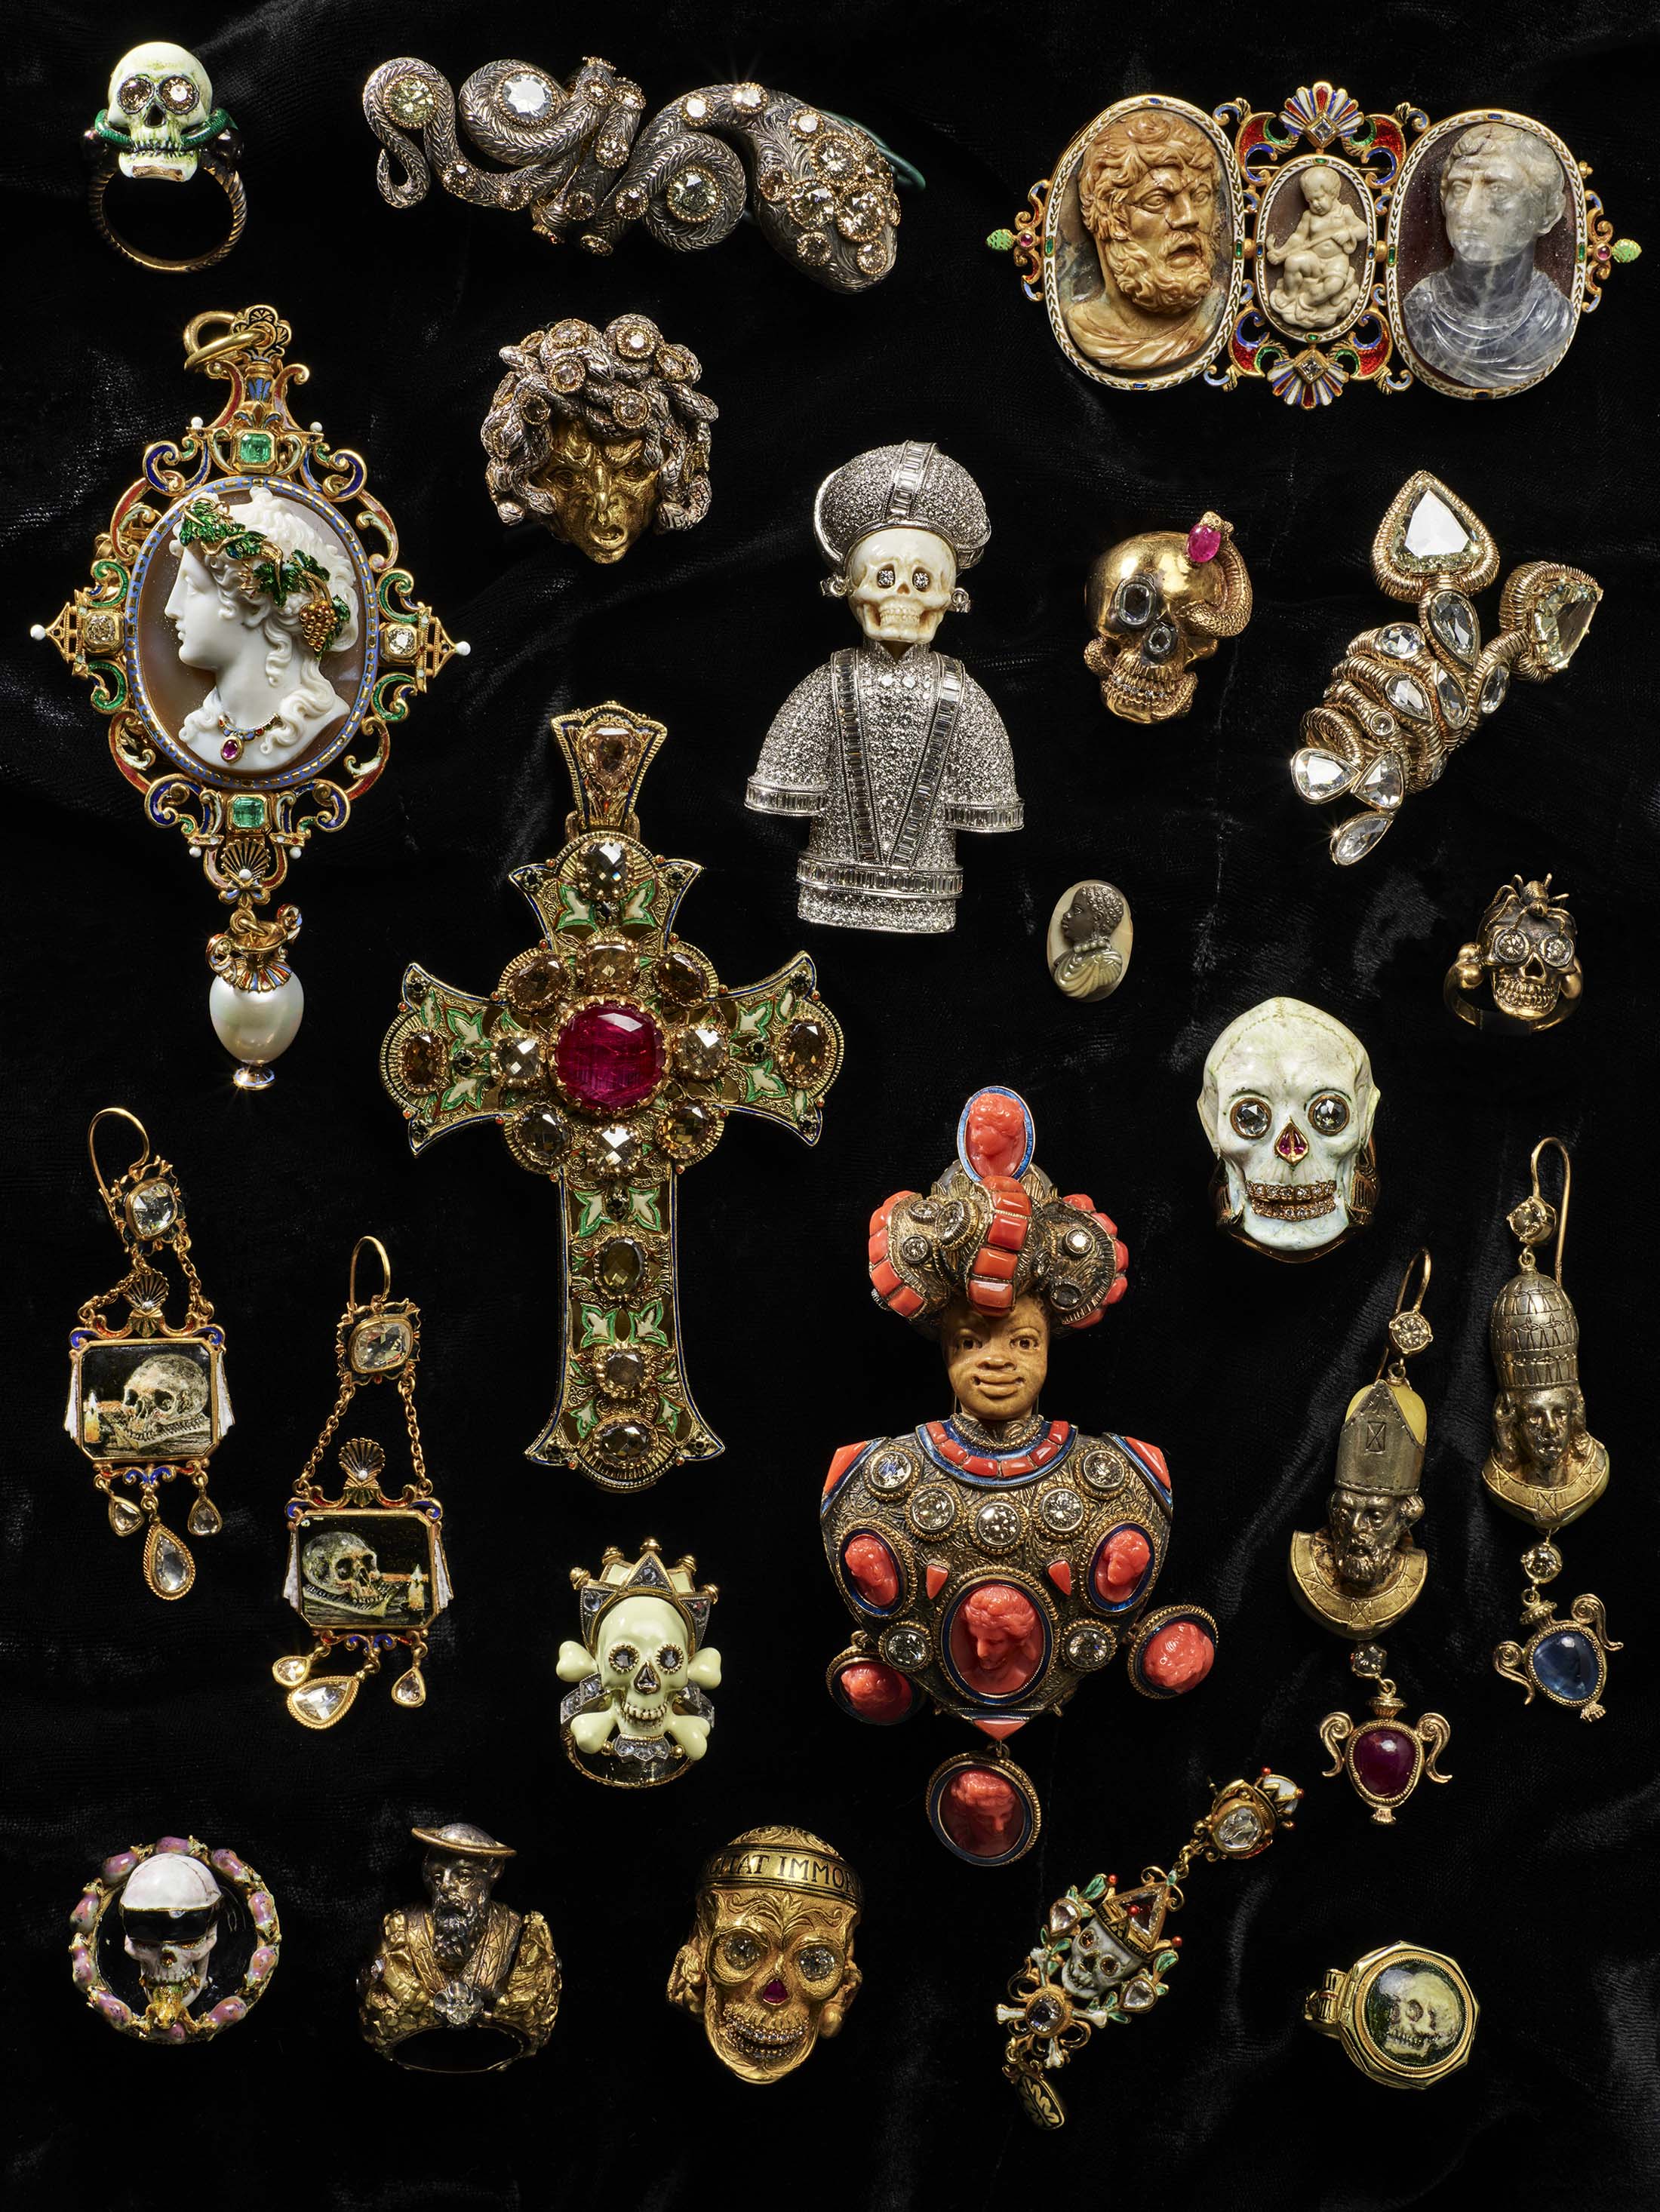 A collection of jewelry pieces from Casa Codognato.
